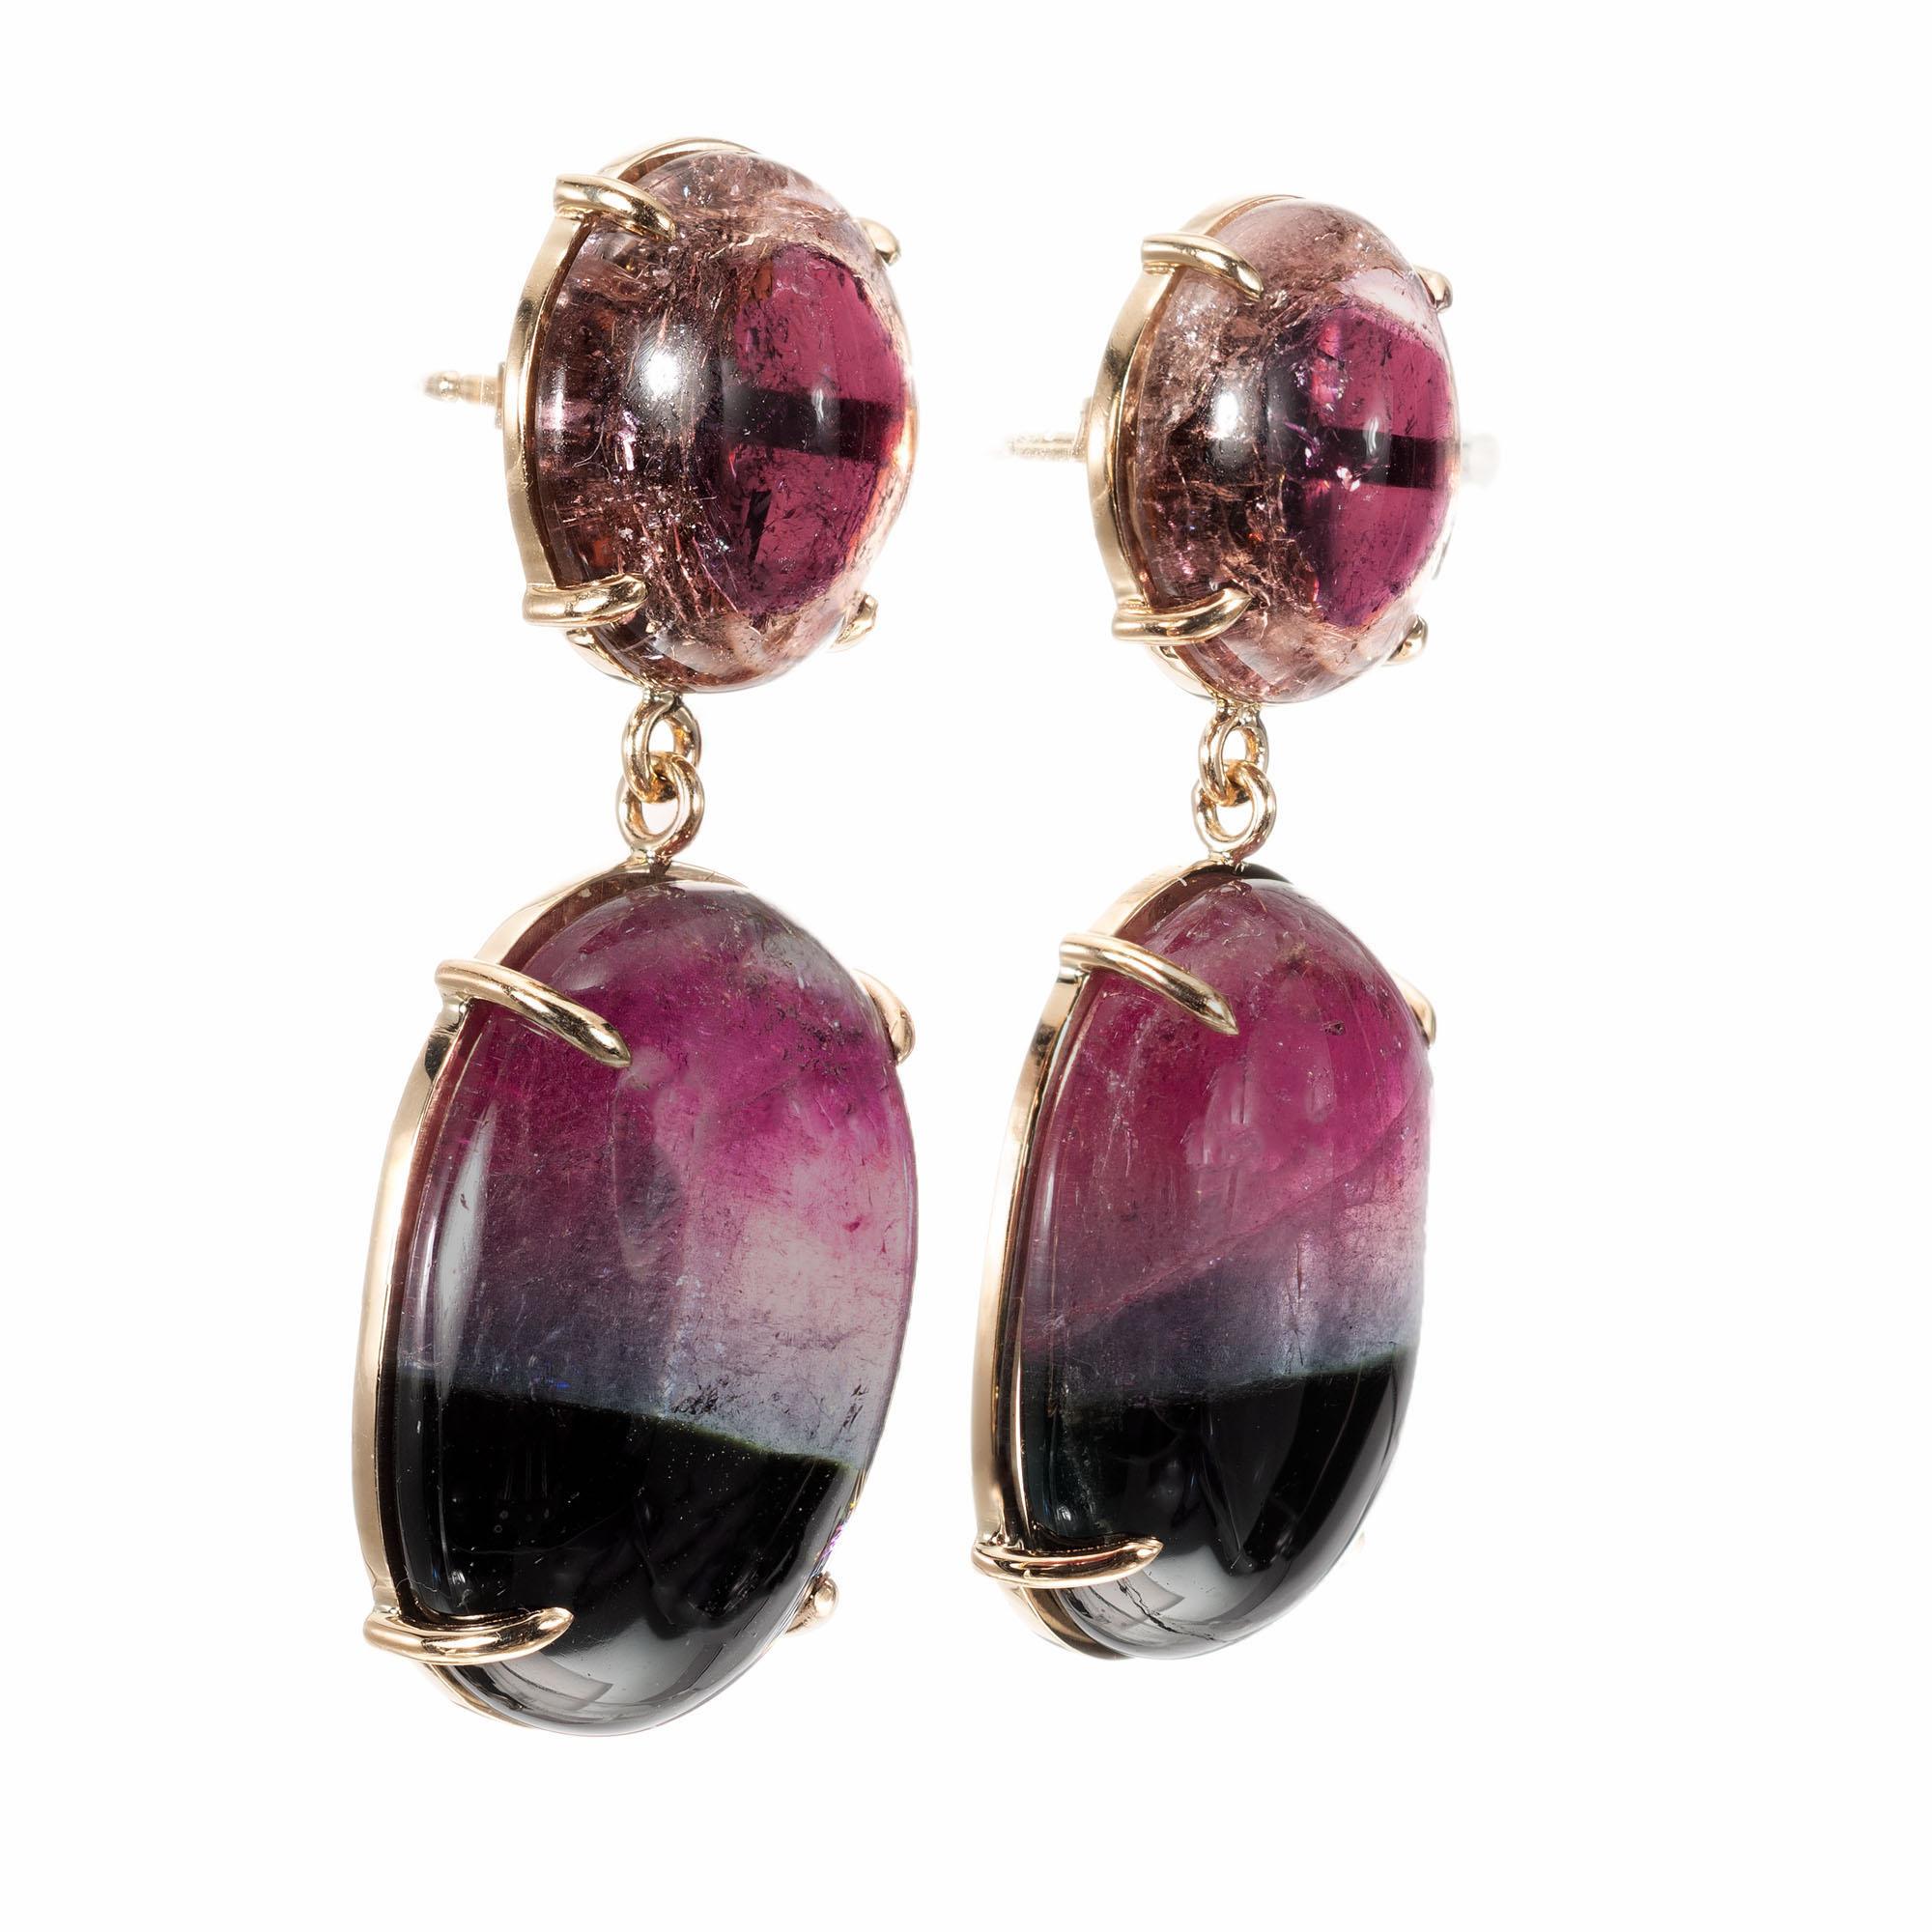 Watermelon cabochon tourmaline earrings. 2 round top tourmalines with 2 oval tourmaline dangles in 14 yellow gold settings. Crafted in the Peter Suchy Workshop 

2 round cabochon tourmalines, approx. total weight: 12.54cts
2 oval cabochon